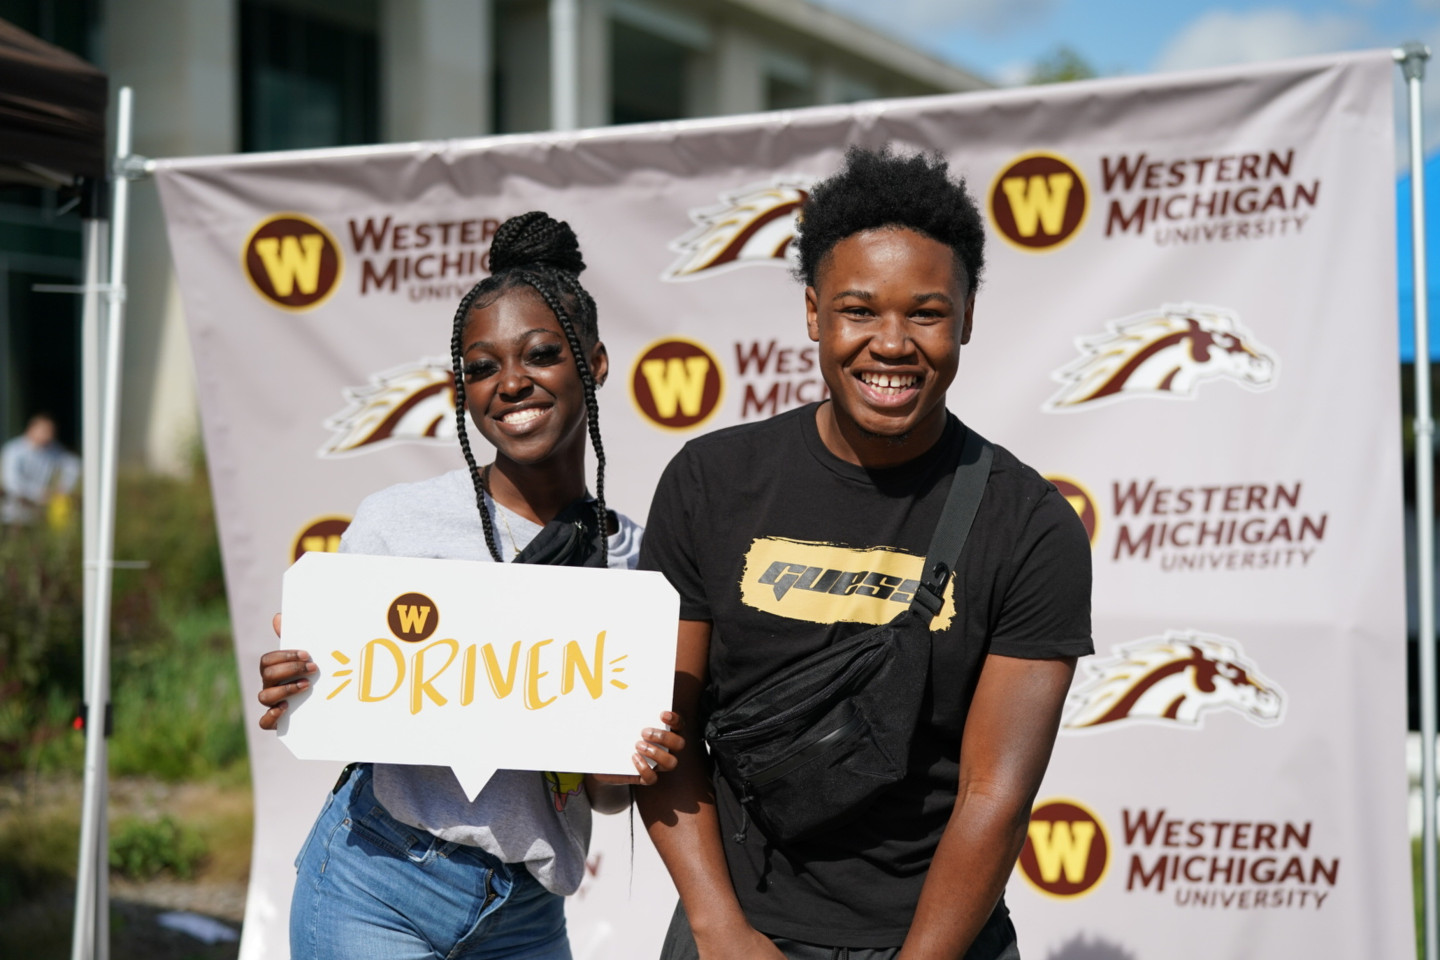 Students pose for a picture at Bronco Bash in front of a backdrop filled with Western Michigan University logos.